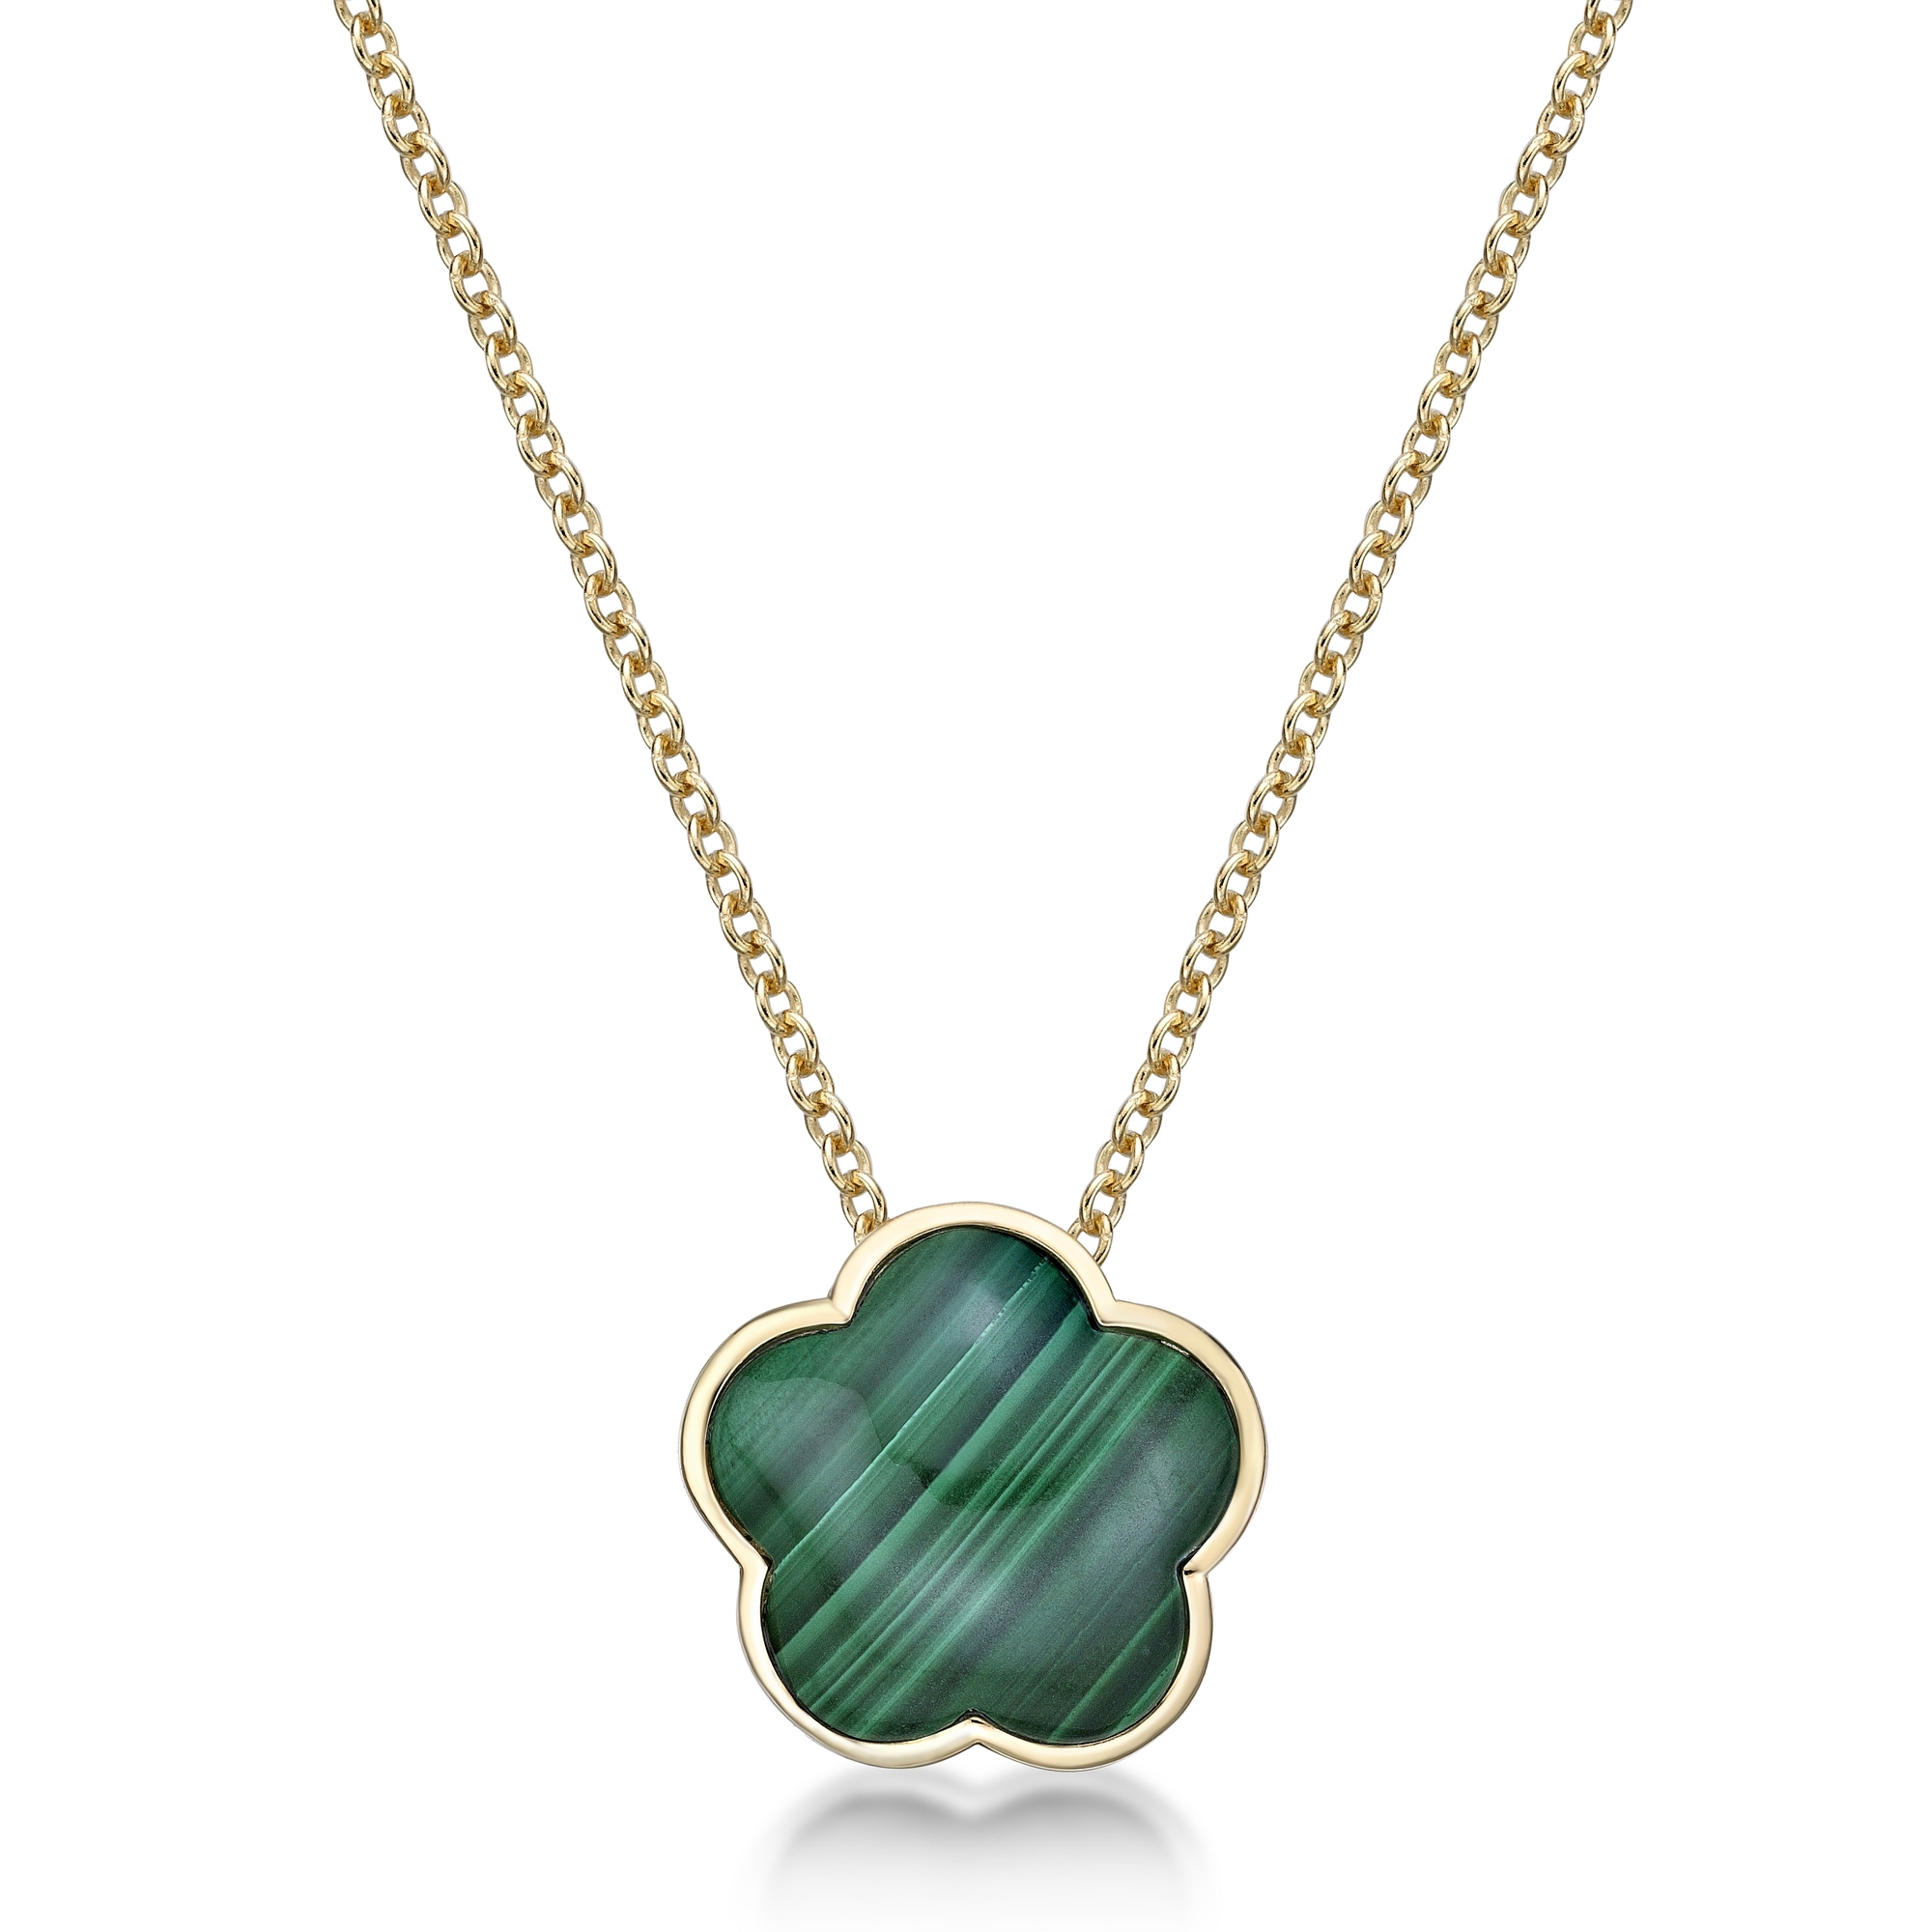 Lavari Jewelers Women’s Malachite Five Petal Flower Pendant Necklace with Spring Ring and Yellow Gold Plating, 925 Sterling Silver, Cubic Zirconia, 18 Inch Chain